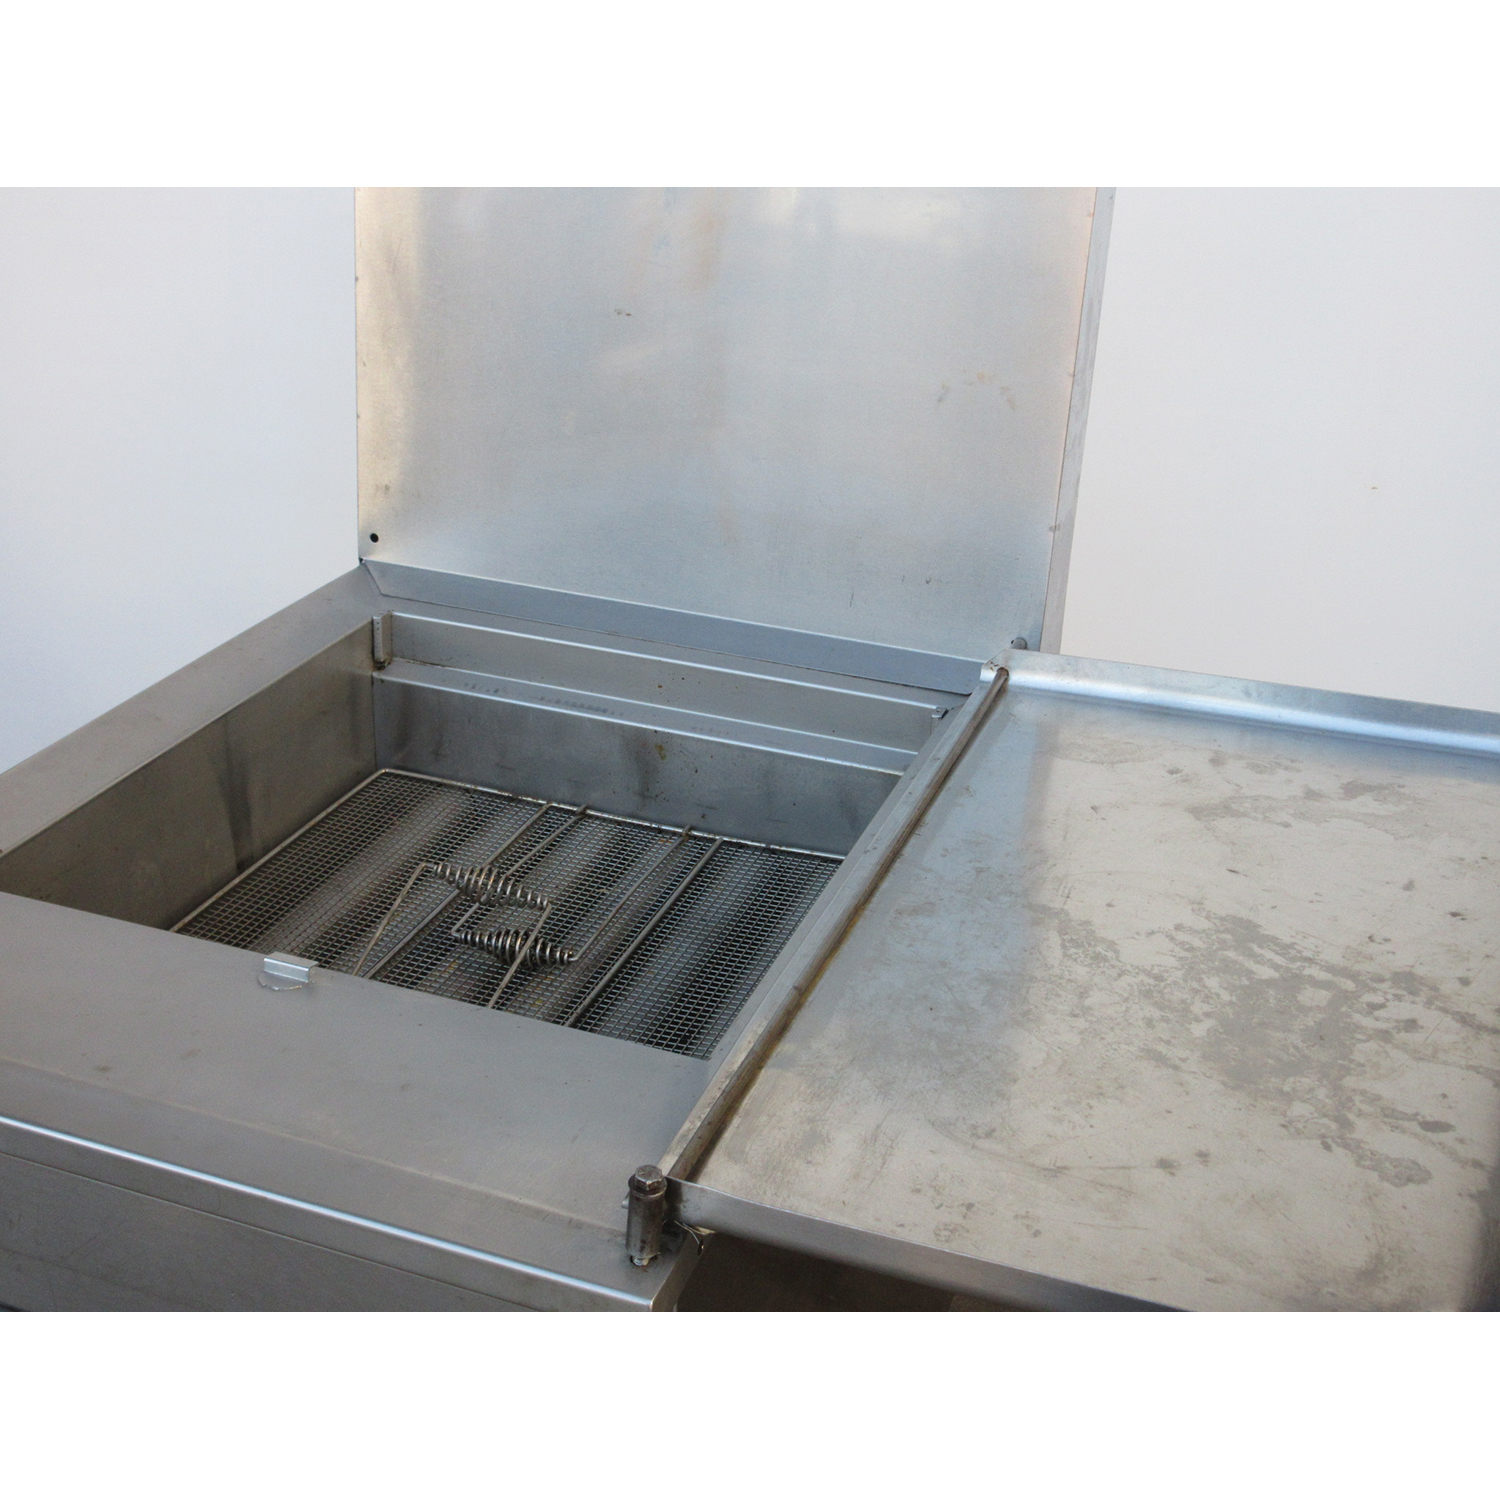 Pitco 24PSS Fryer 24 Donut, Used Excellent Condition image 1